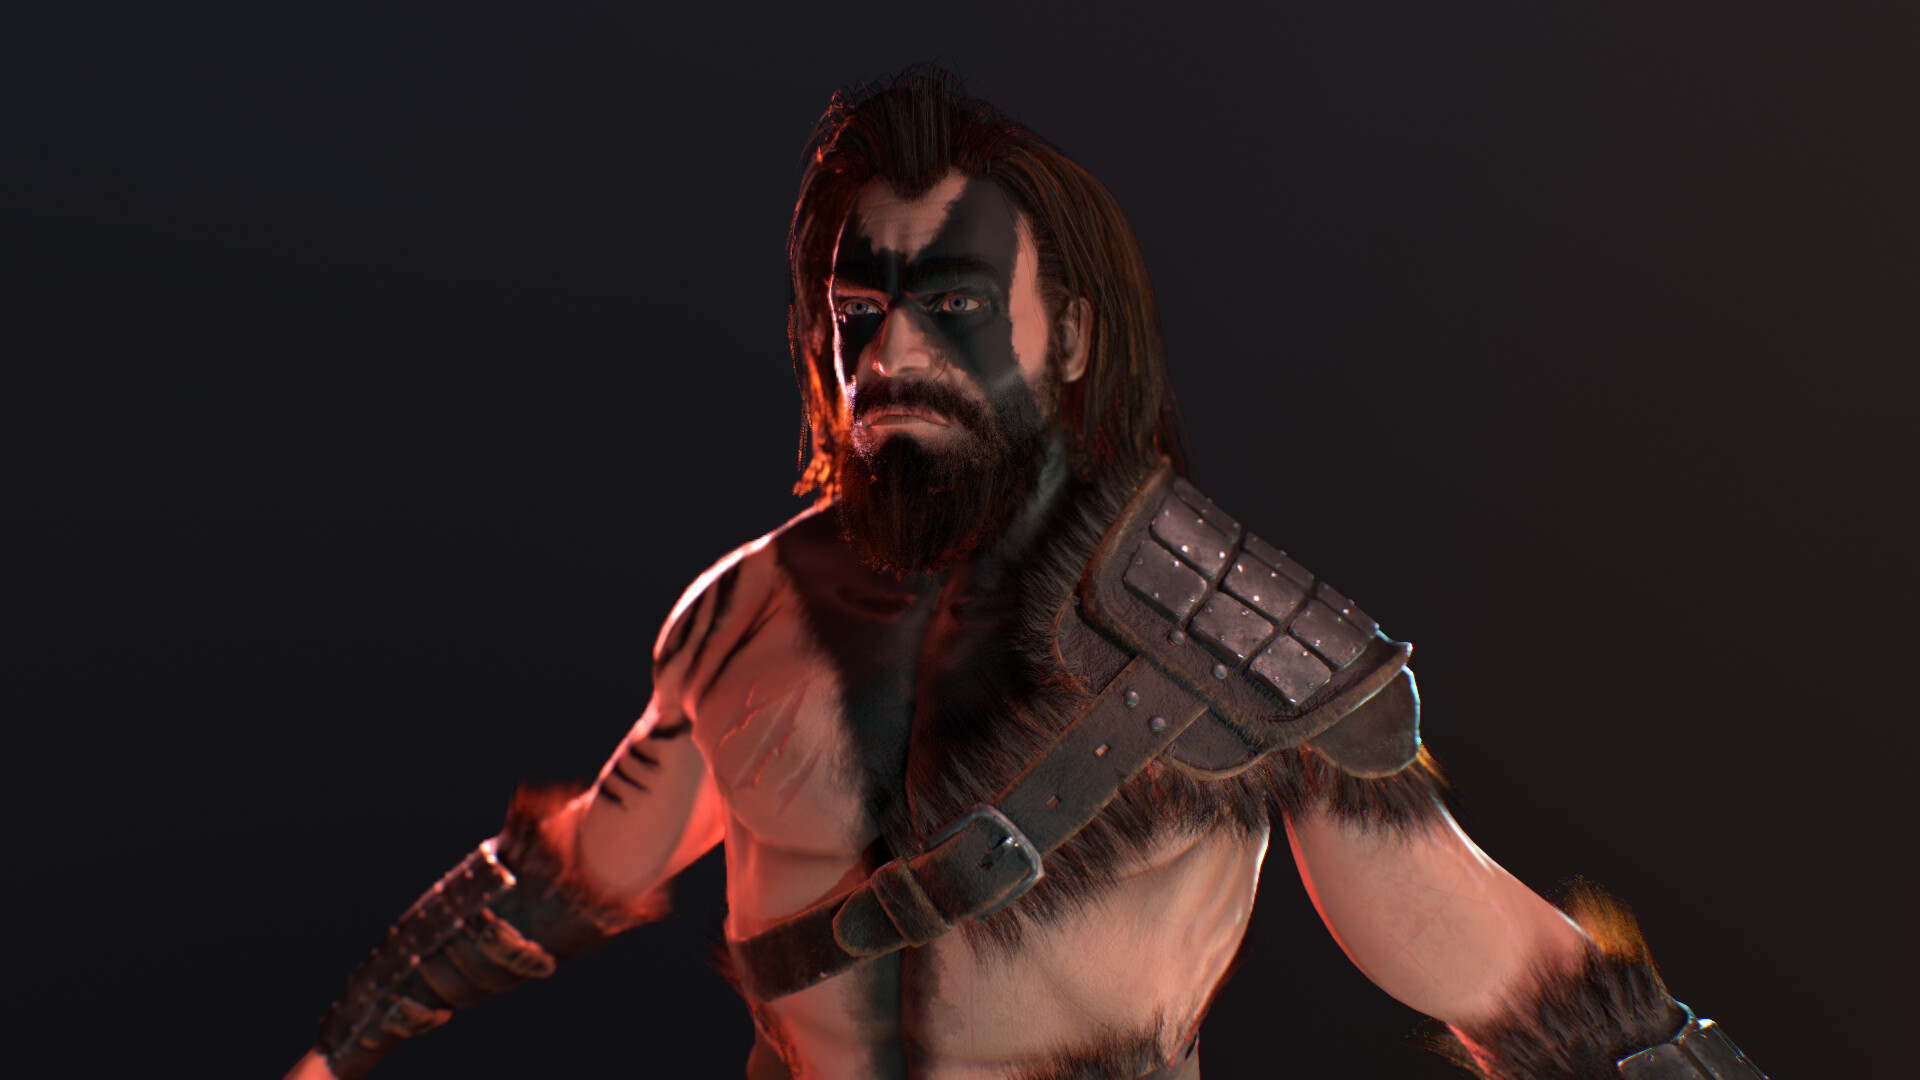 Barbarian Warrior - Finished Projects - Blender Artists Community